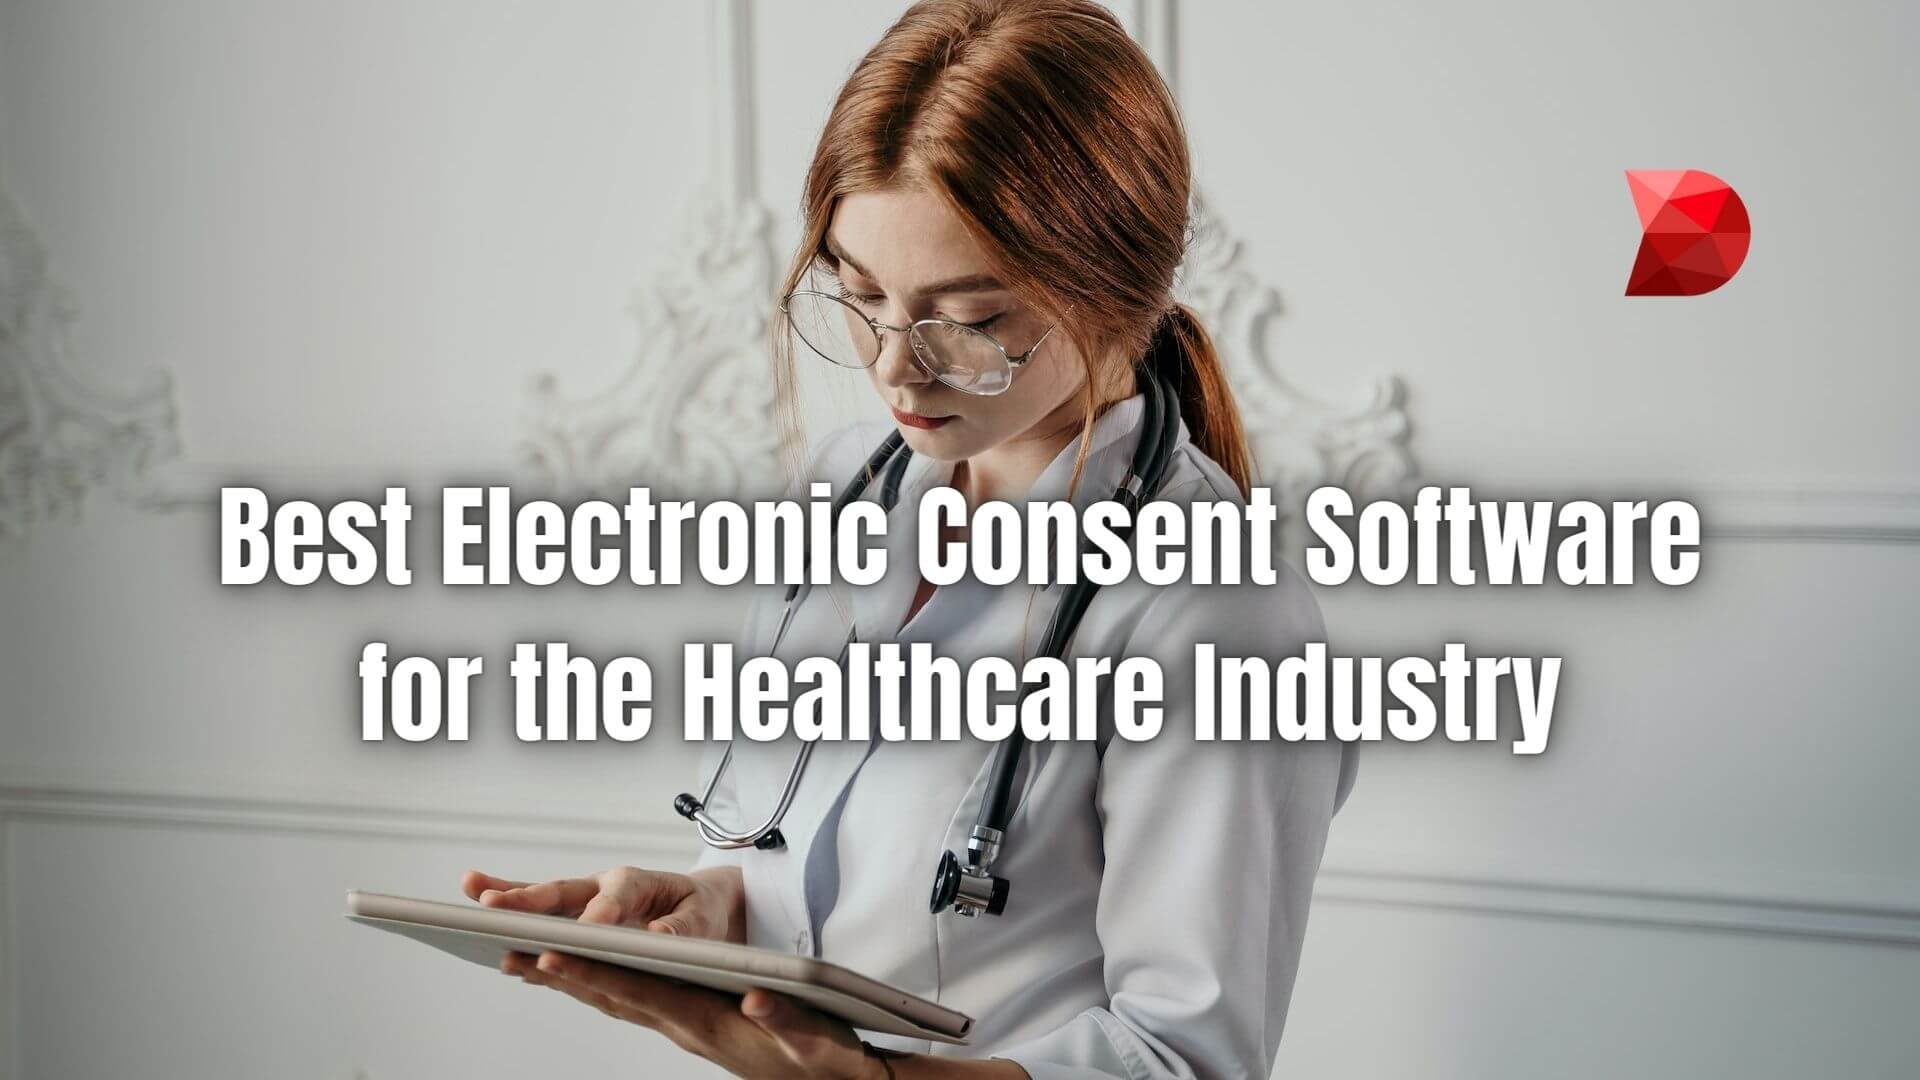 Electronic consent software is a digital tool that makes getting, documenting, and saving patient consent easier and manageable. Learn more!